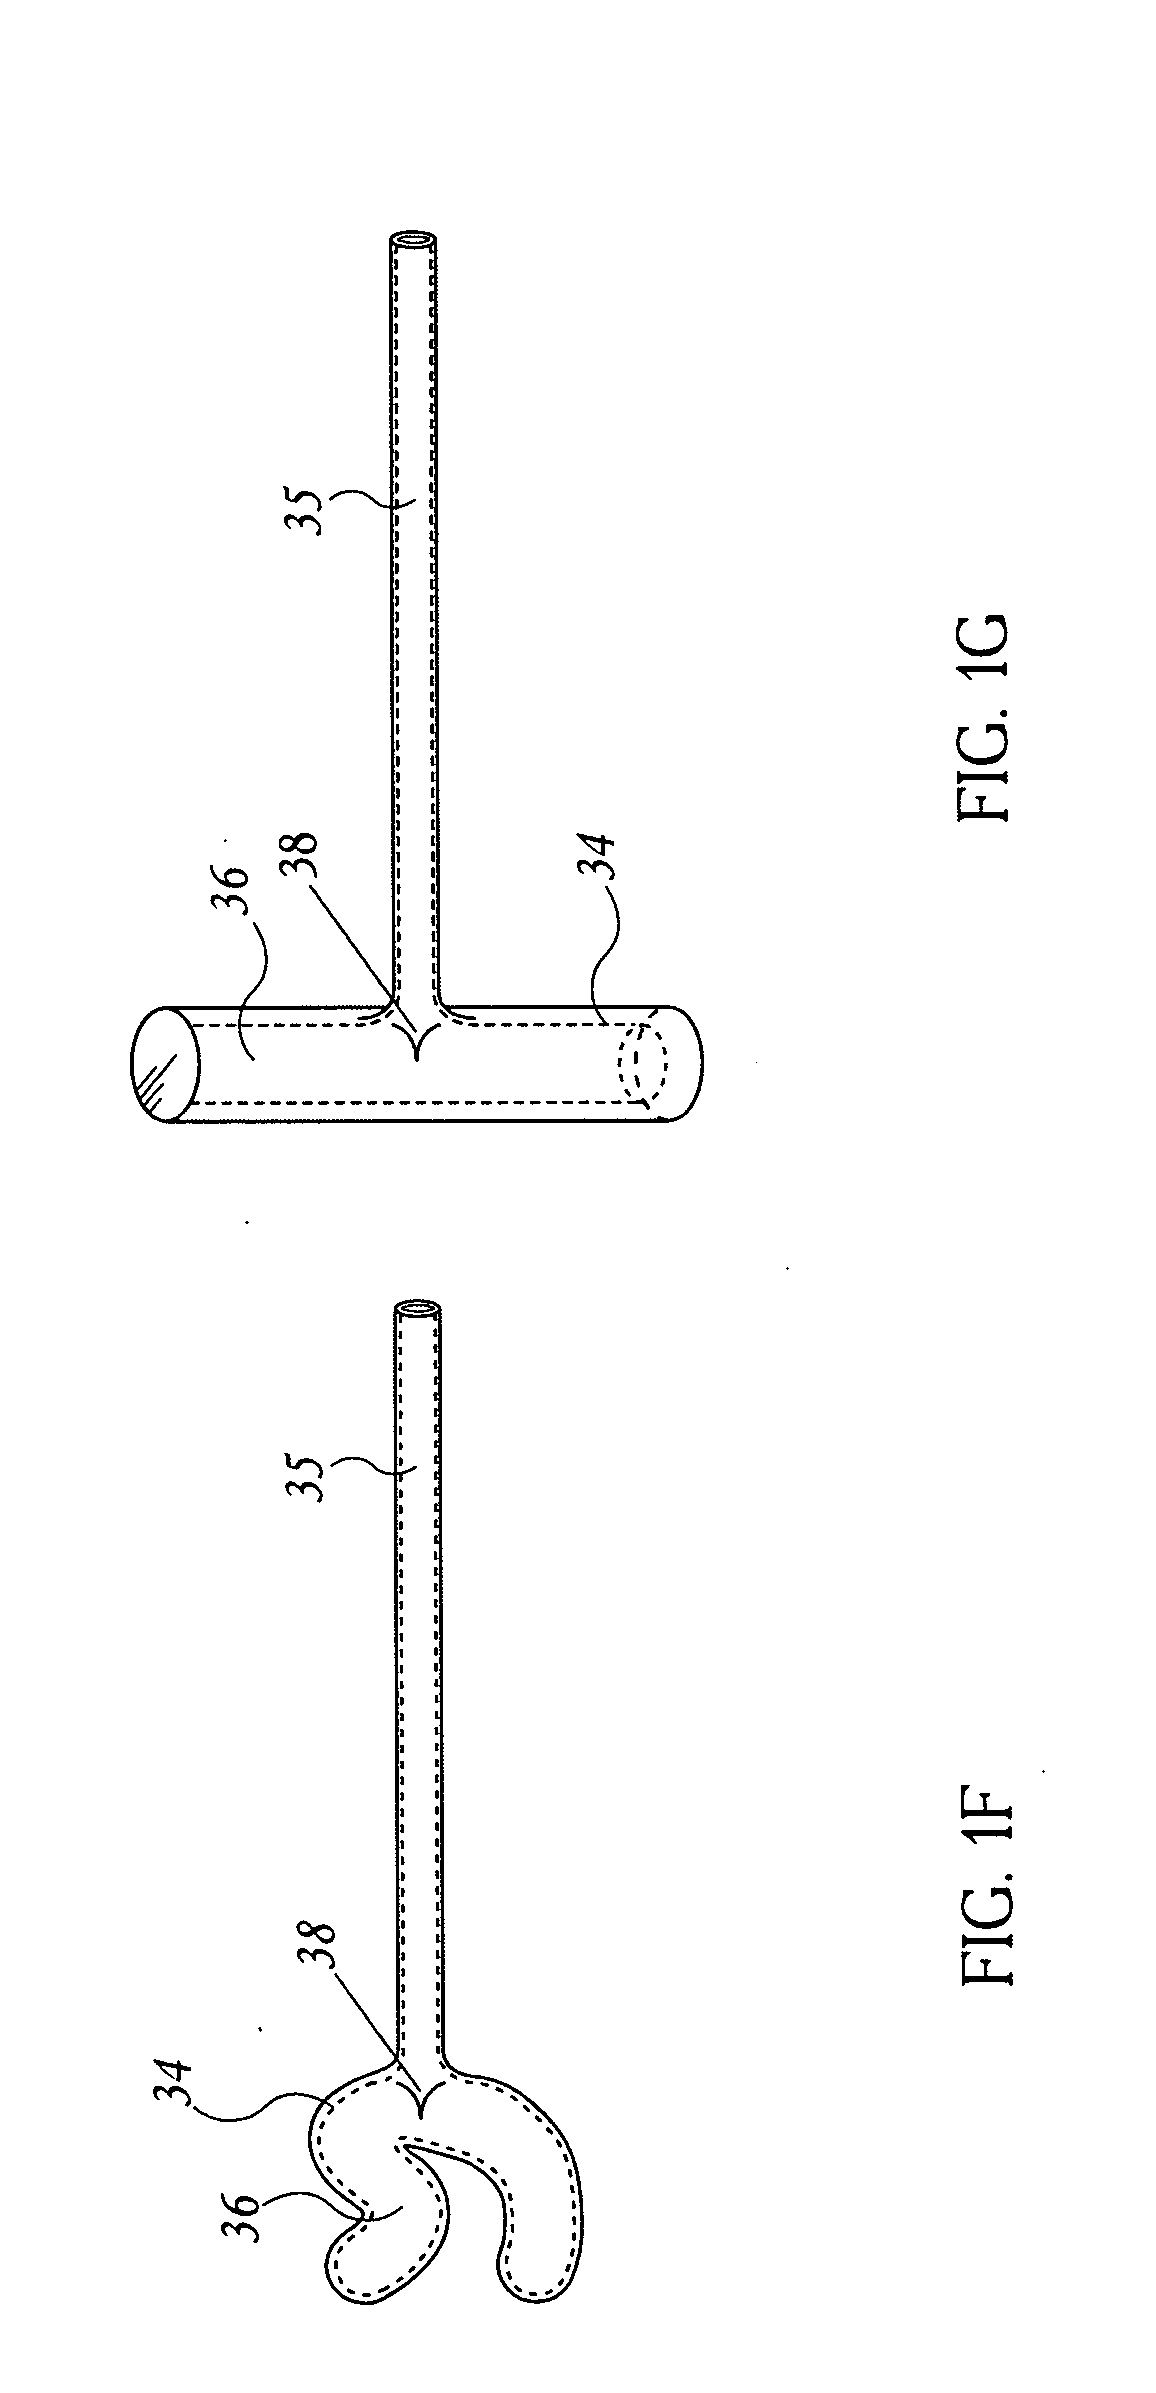 Methods and devices for percutaneous, non-laparoscopic treatment of obesity